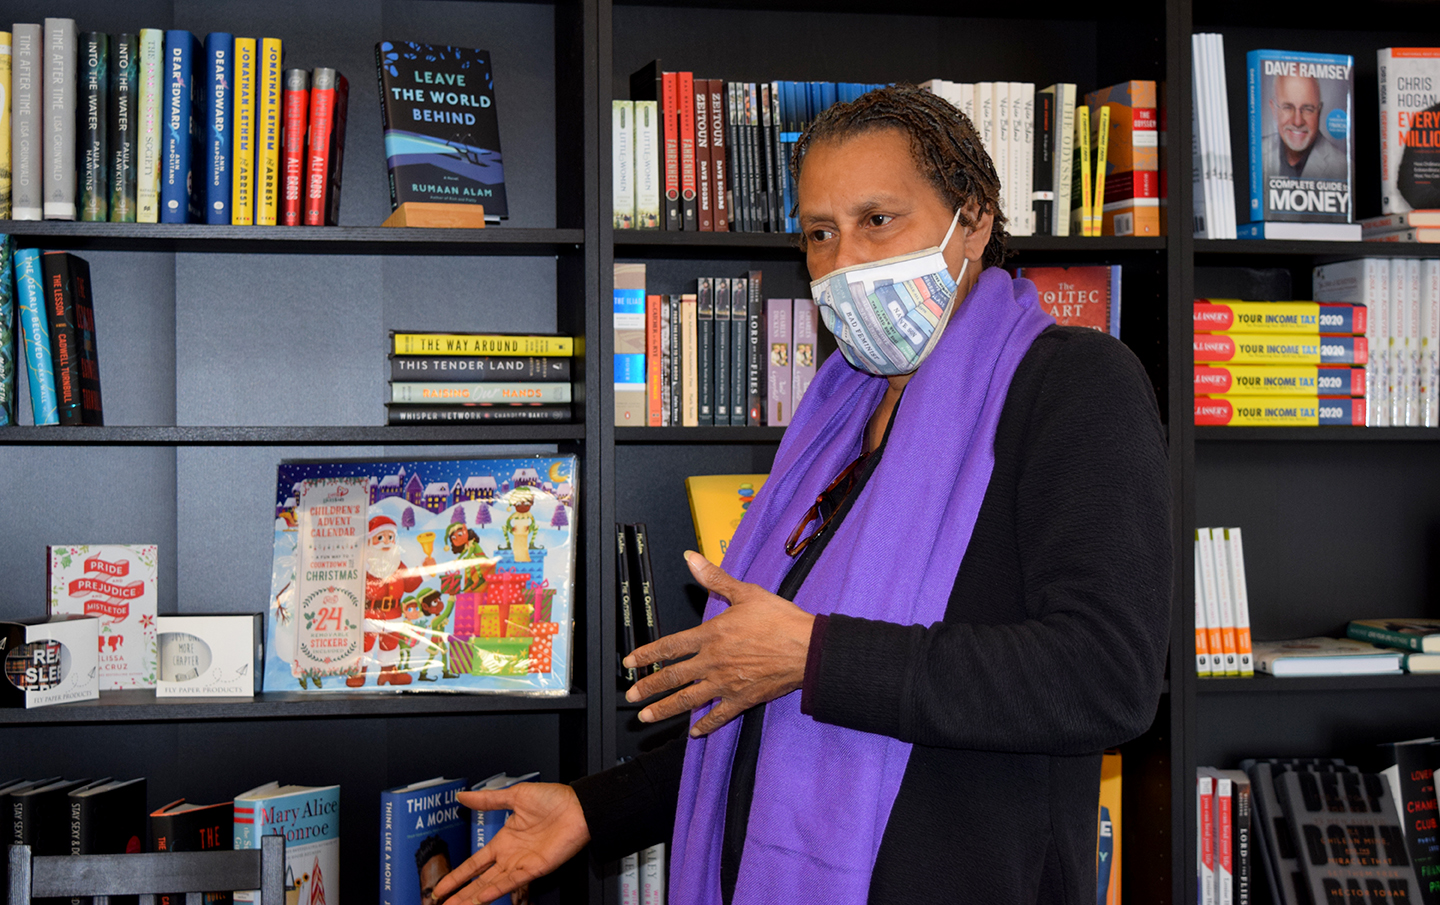 Turning Page Bookshop owner VaLinda Miller sought out pandemic relief through grants and loans for her store in Goose Creek, but the process has been complex and unreliable, she said. (Photos/Teri Errico Griffis)